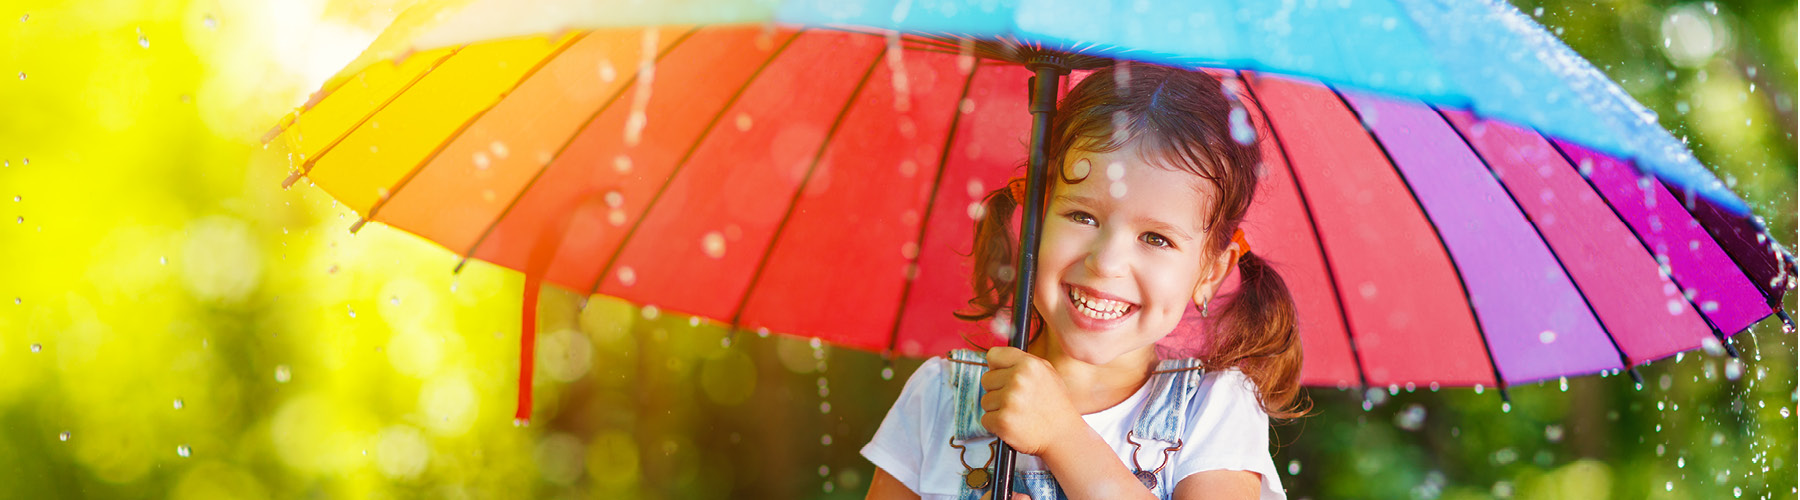 child with an umbrella